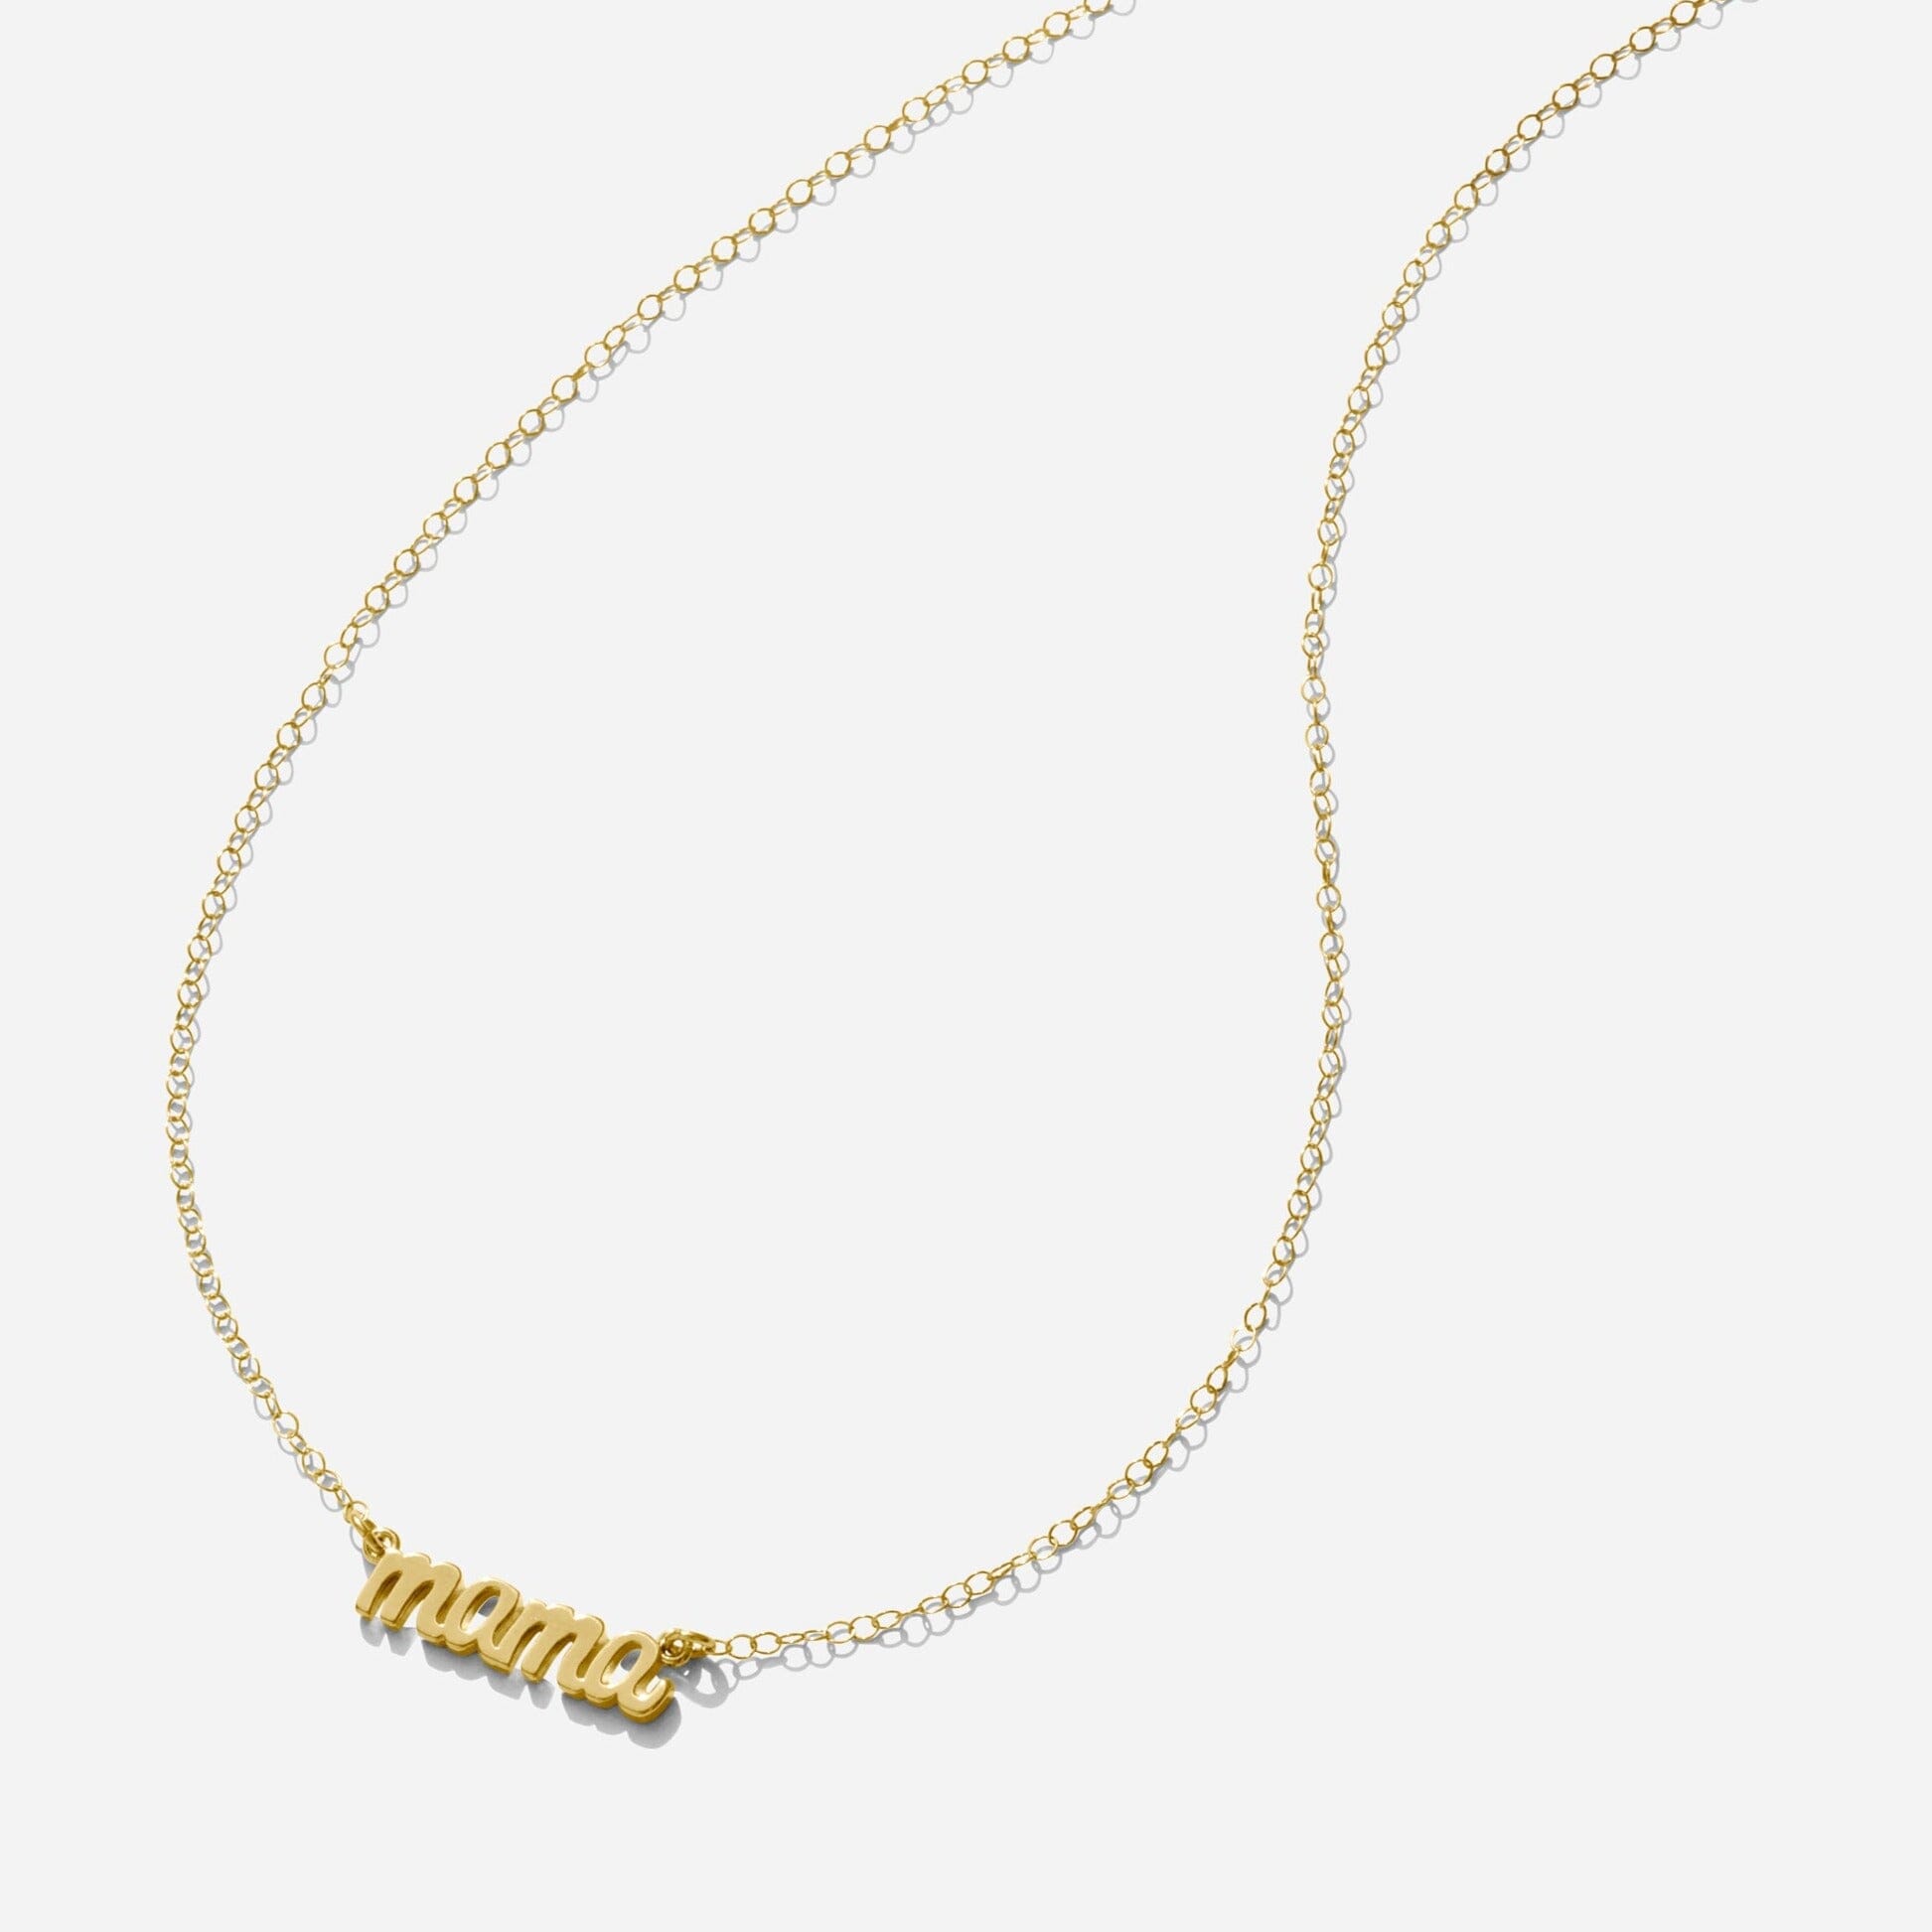 Gold Mama Necklace handmade in America by Katie Dean Jewelry, made in America as seen on a natural white background, perfect for the dainty minimal jewelry lovers.